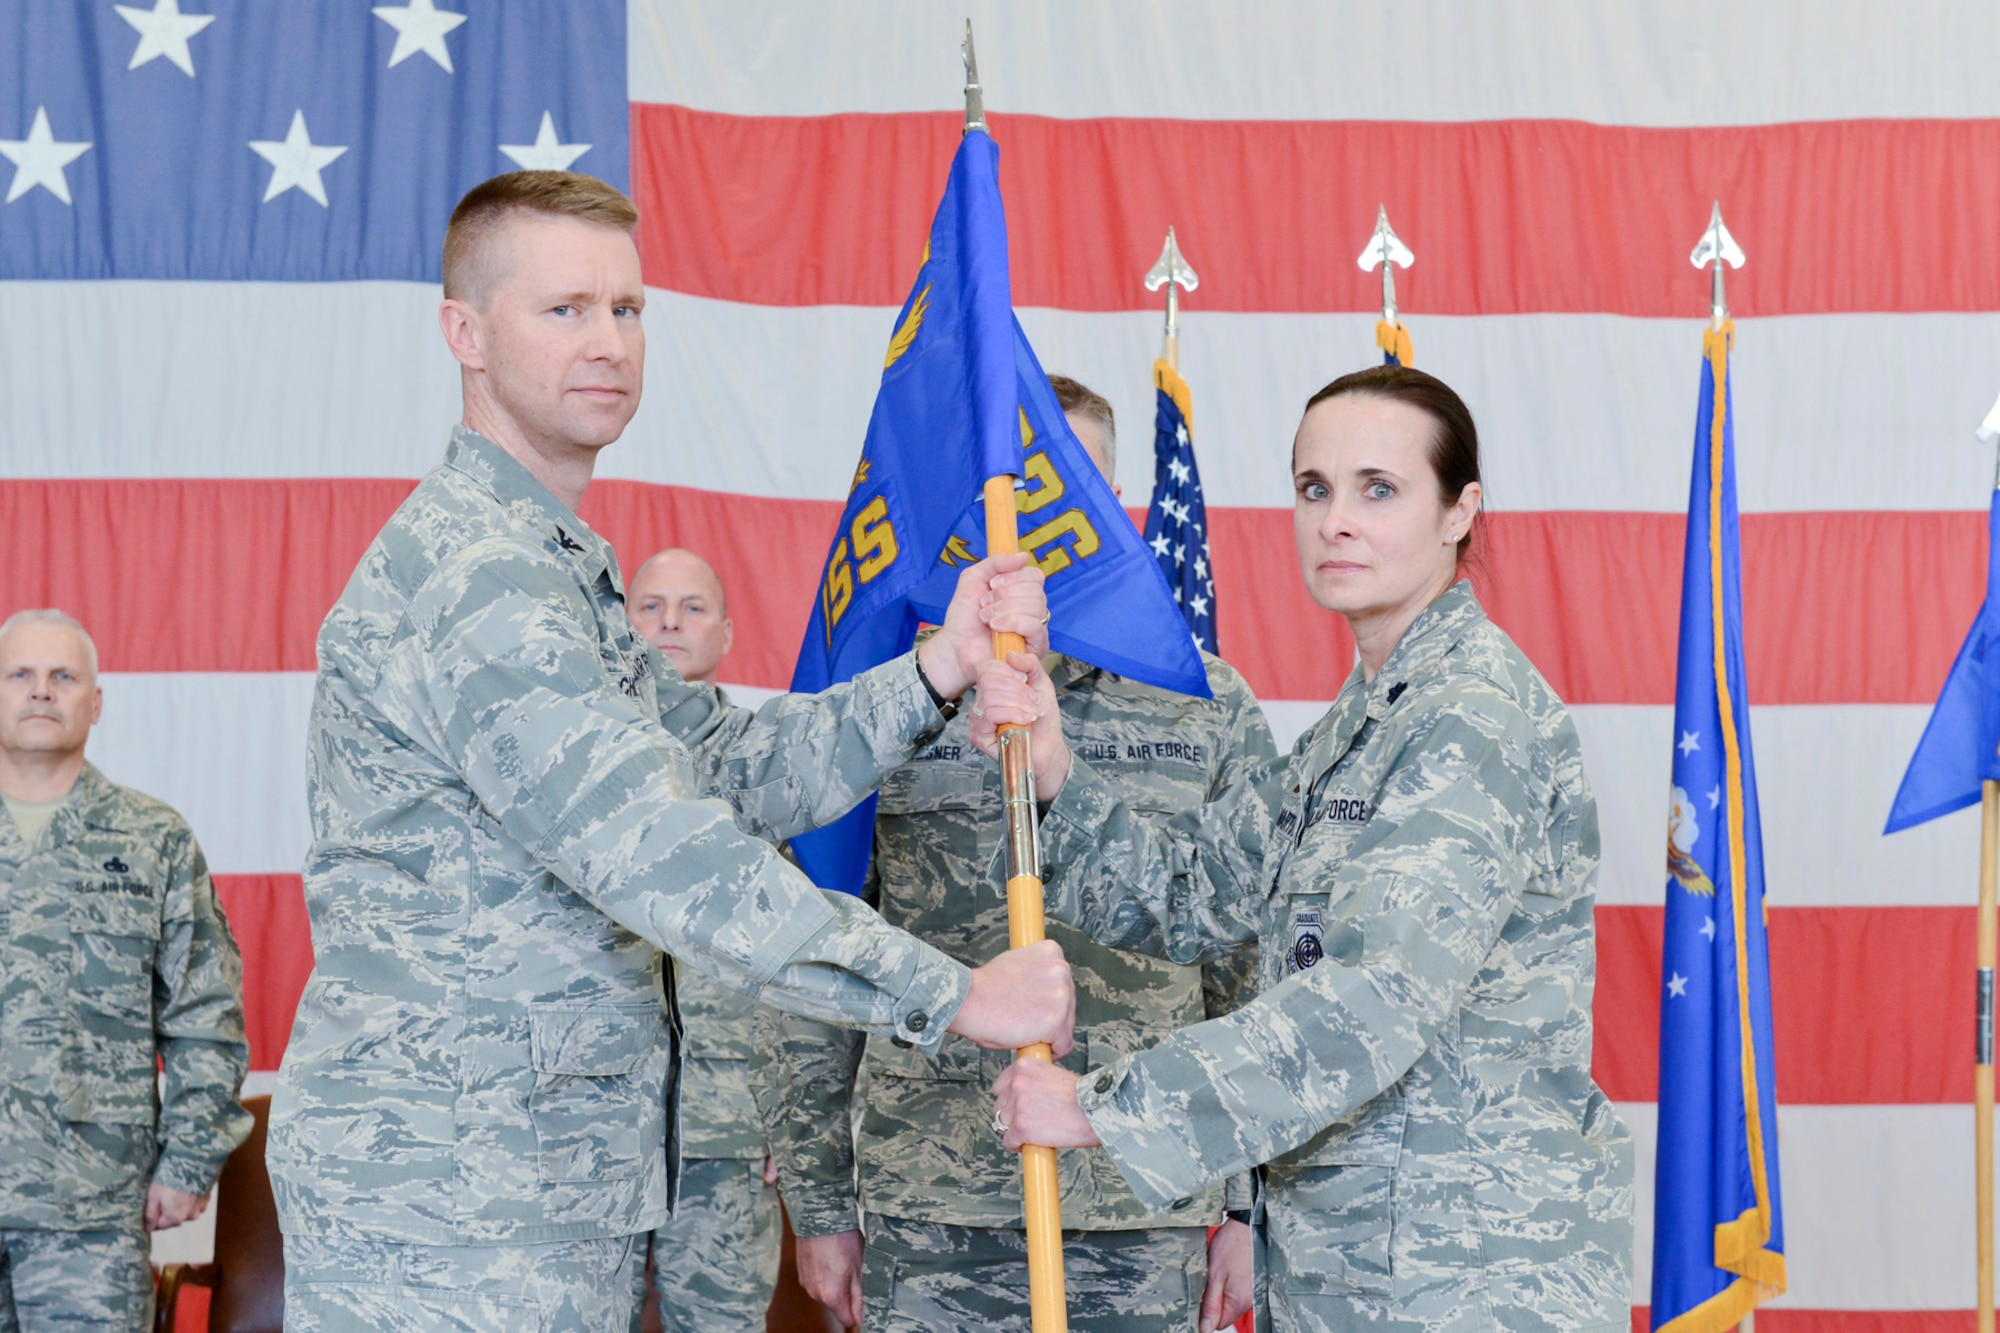 Col. Mark Chidley (left), 132d Wing (132WG), Des Moines, Iowa  Intelligence Surveillance Reconnaissance Group (ISRG) Commander, passes the 132d Intelligence Support Squadron (132 ISS) guidon to Lt. Col. Leslie Zyzda-Martin (right), 132 ISS Commander, during the 132WG ISRG Activation Ceremony held in the 132WG Fire House on Saturday, March 7, 2015.  This ceremony formally recognizes the official activation of the 132WG ISRG.  (U.S. Air National Guard photo by Staff Sgt. Linda K. Burger/Released)